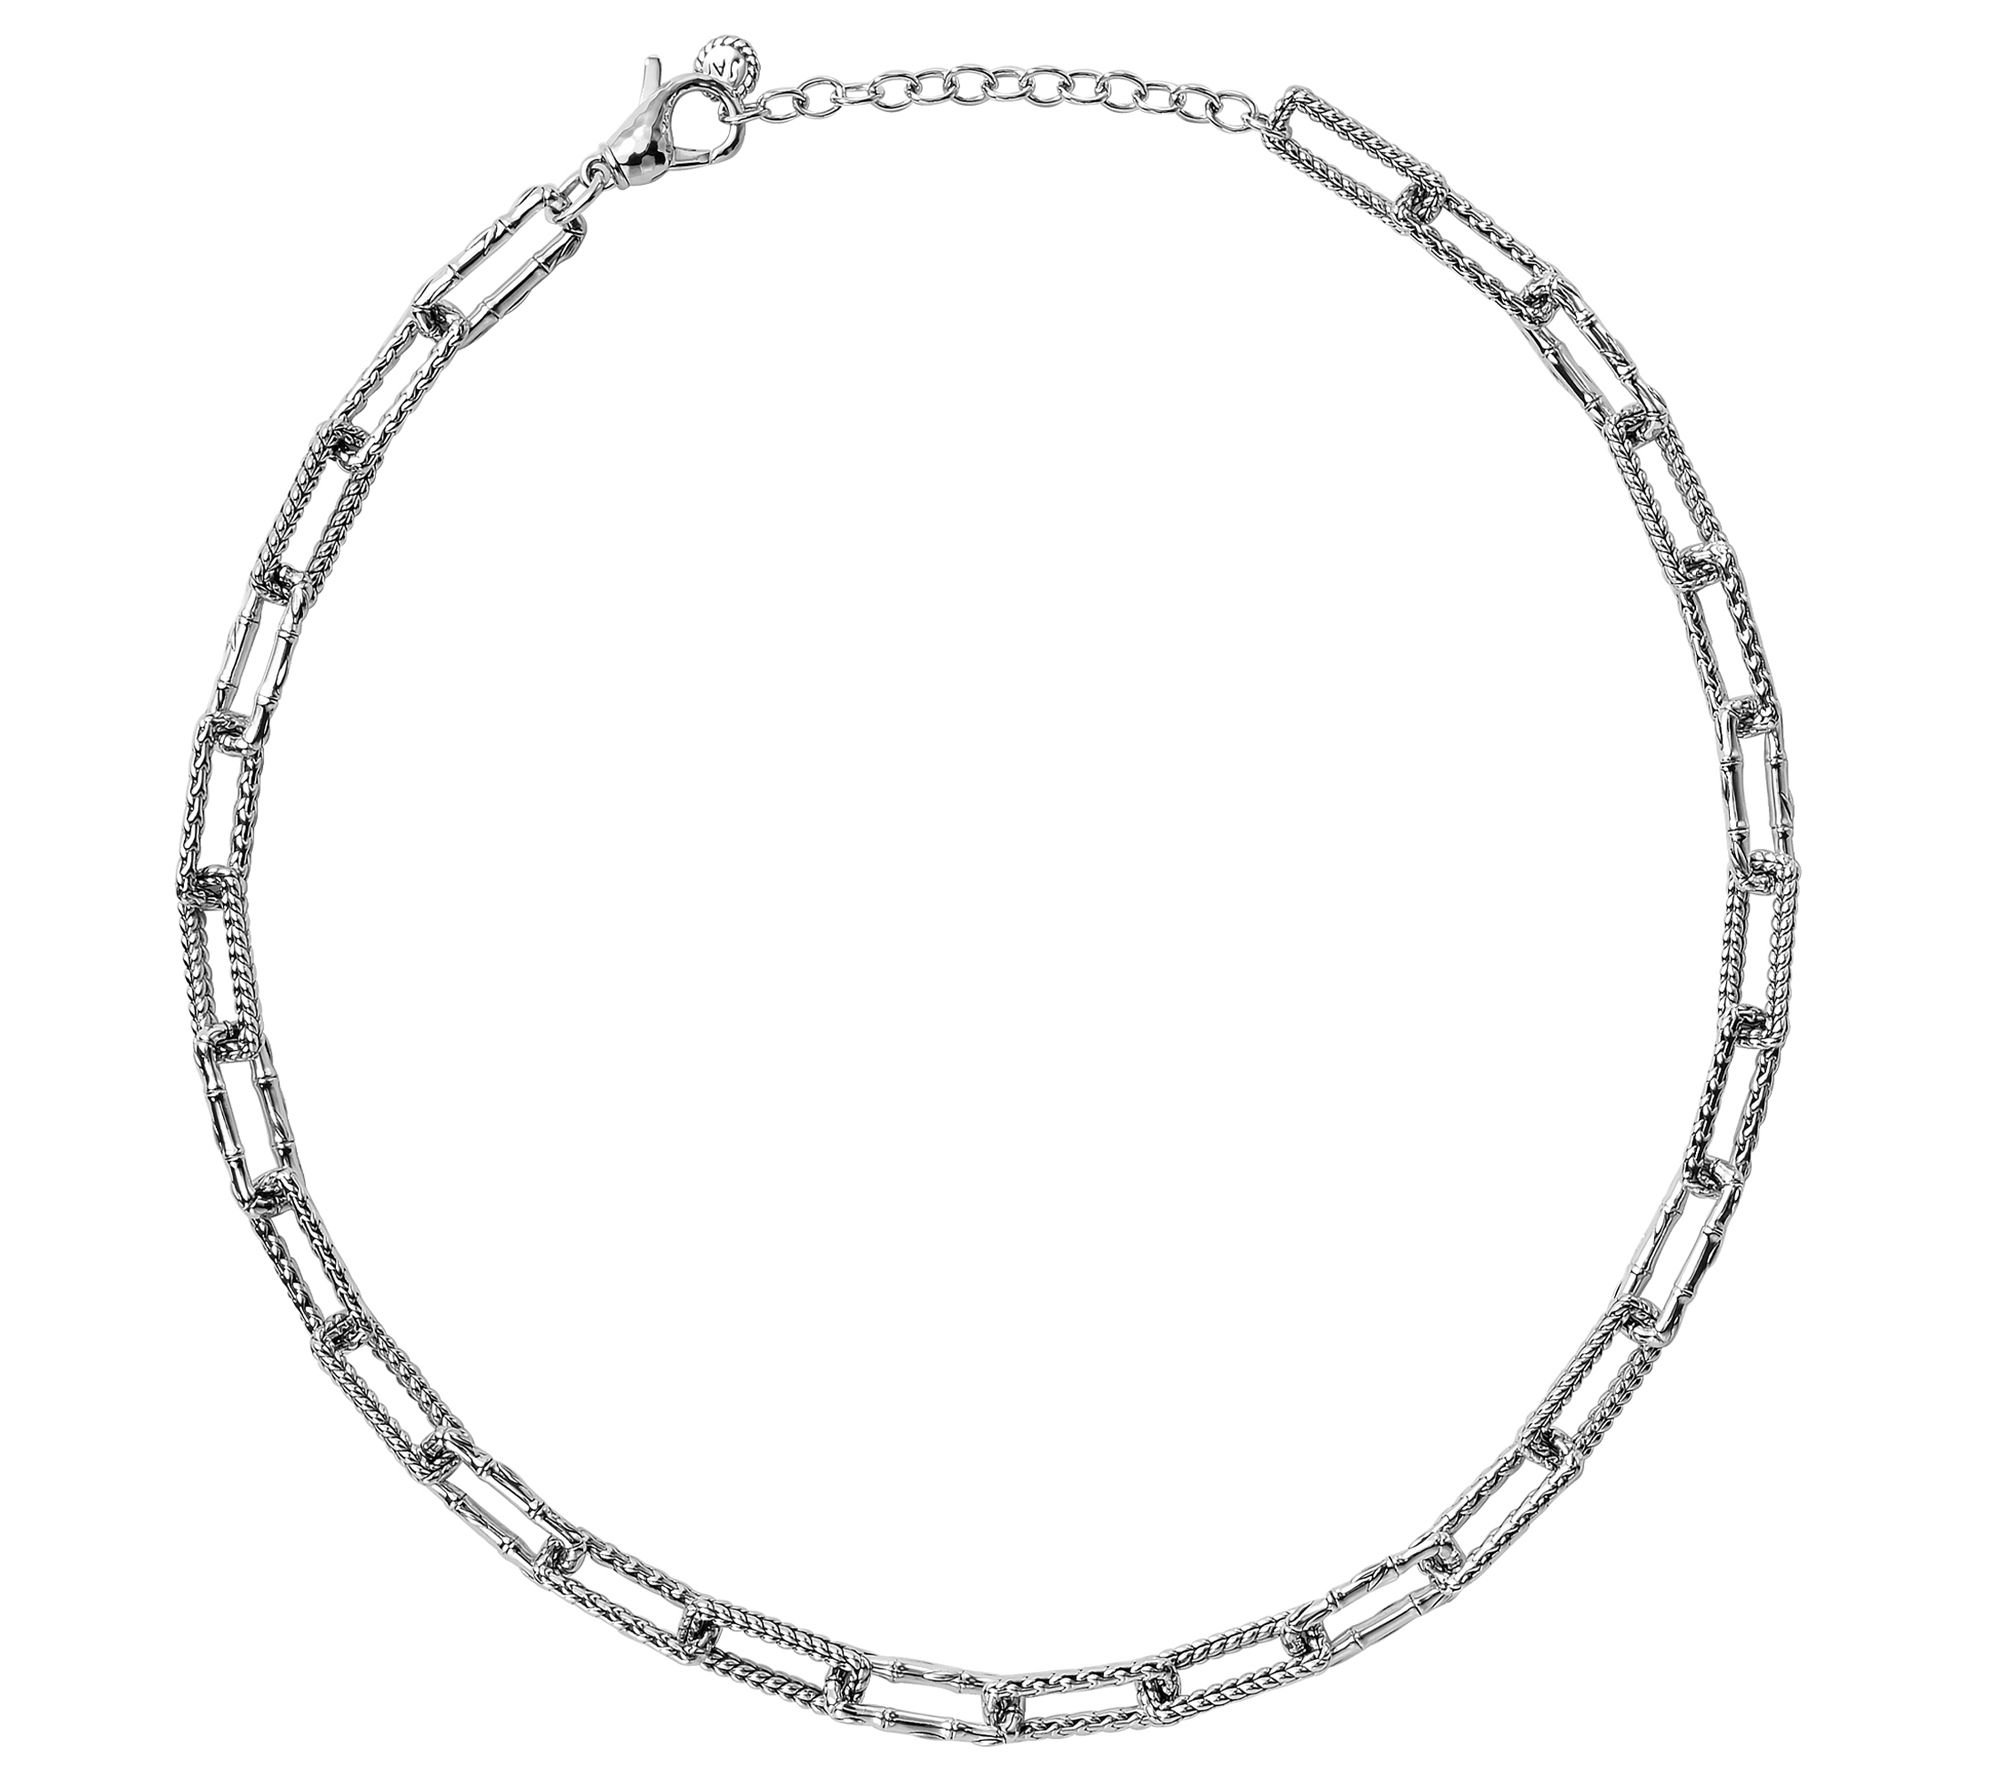 JAI Sterling Silver Global Textures Paperclip Necklace, 34.0g - QVC.com